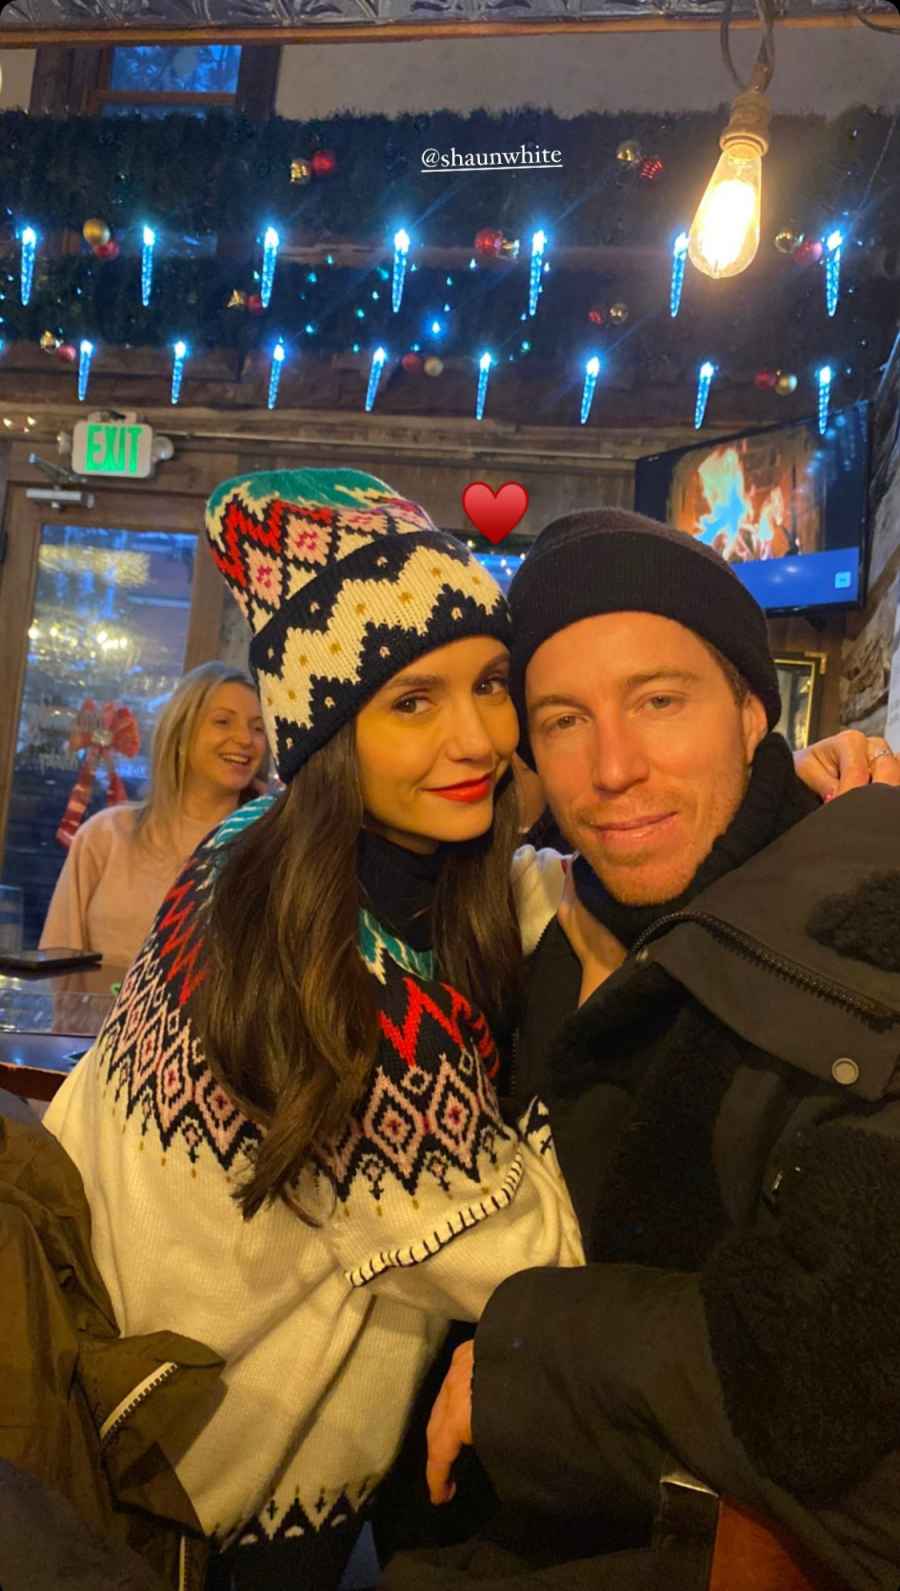 Nina and Shaun White cuddle for a sweet photo.